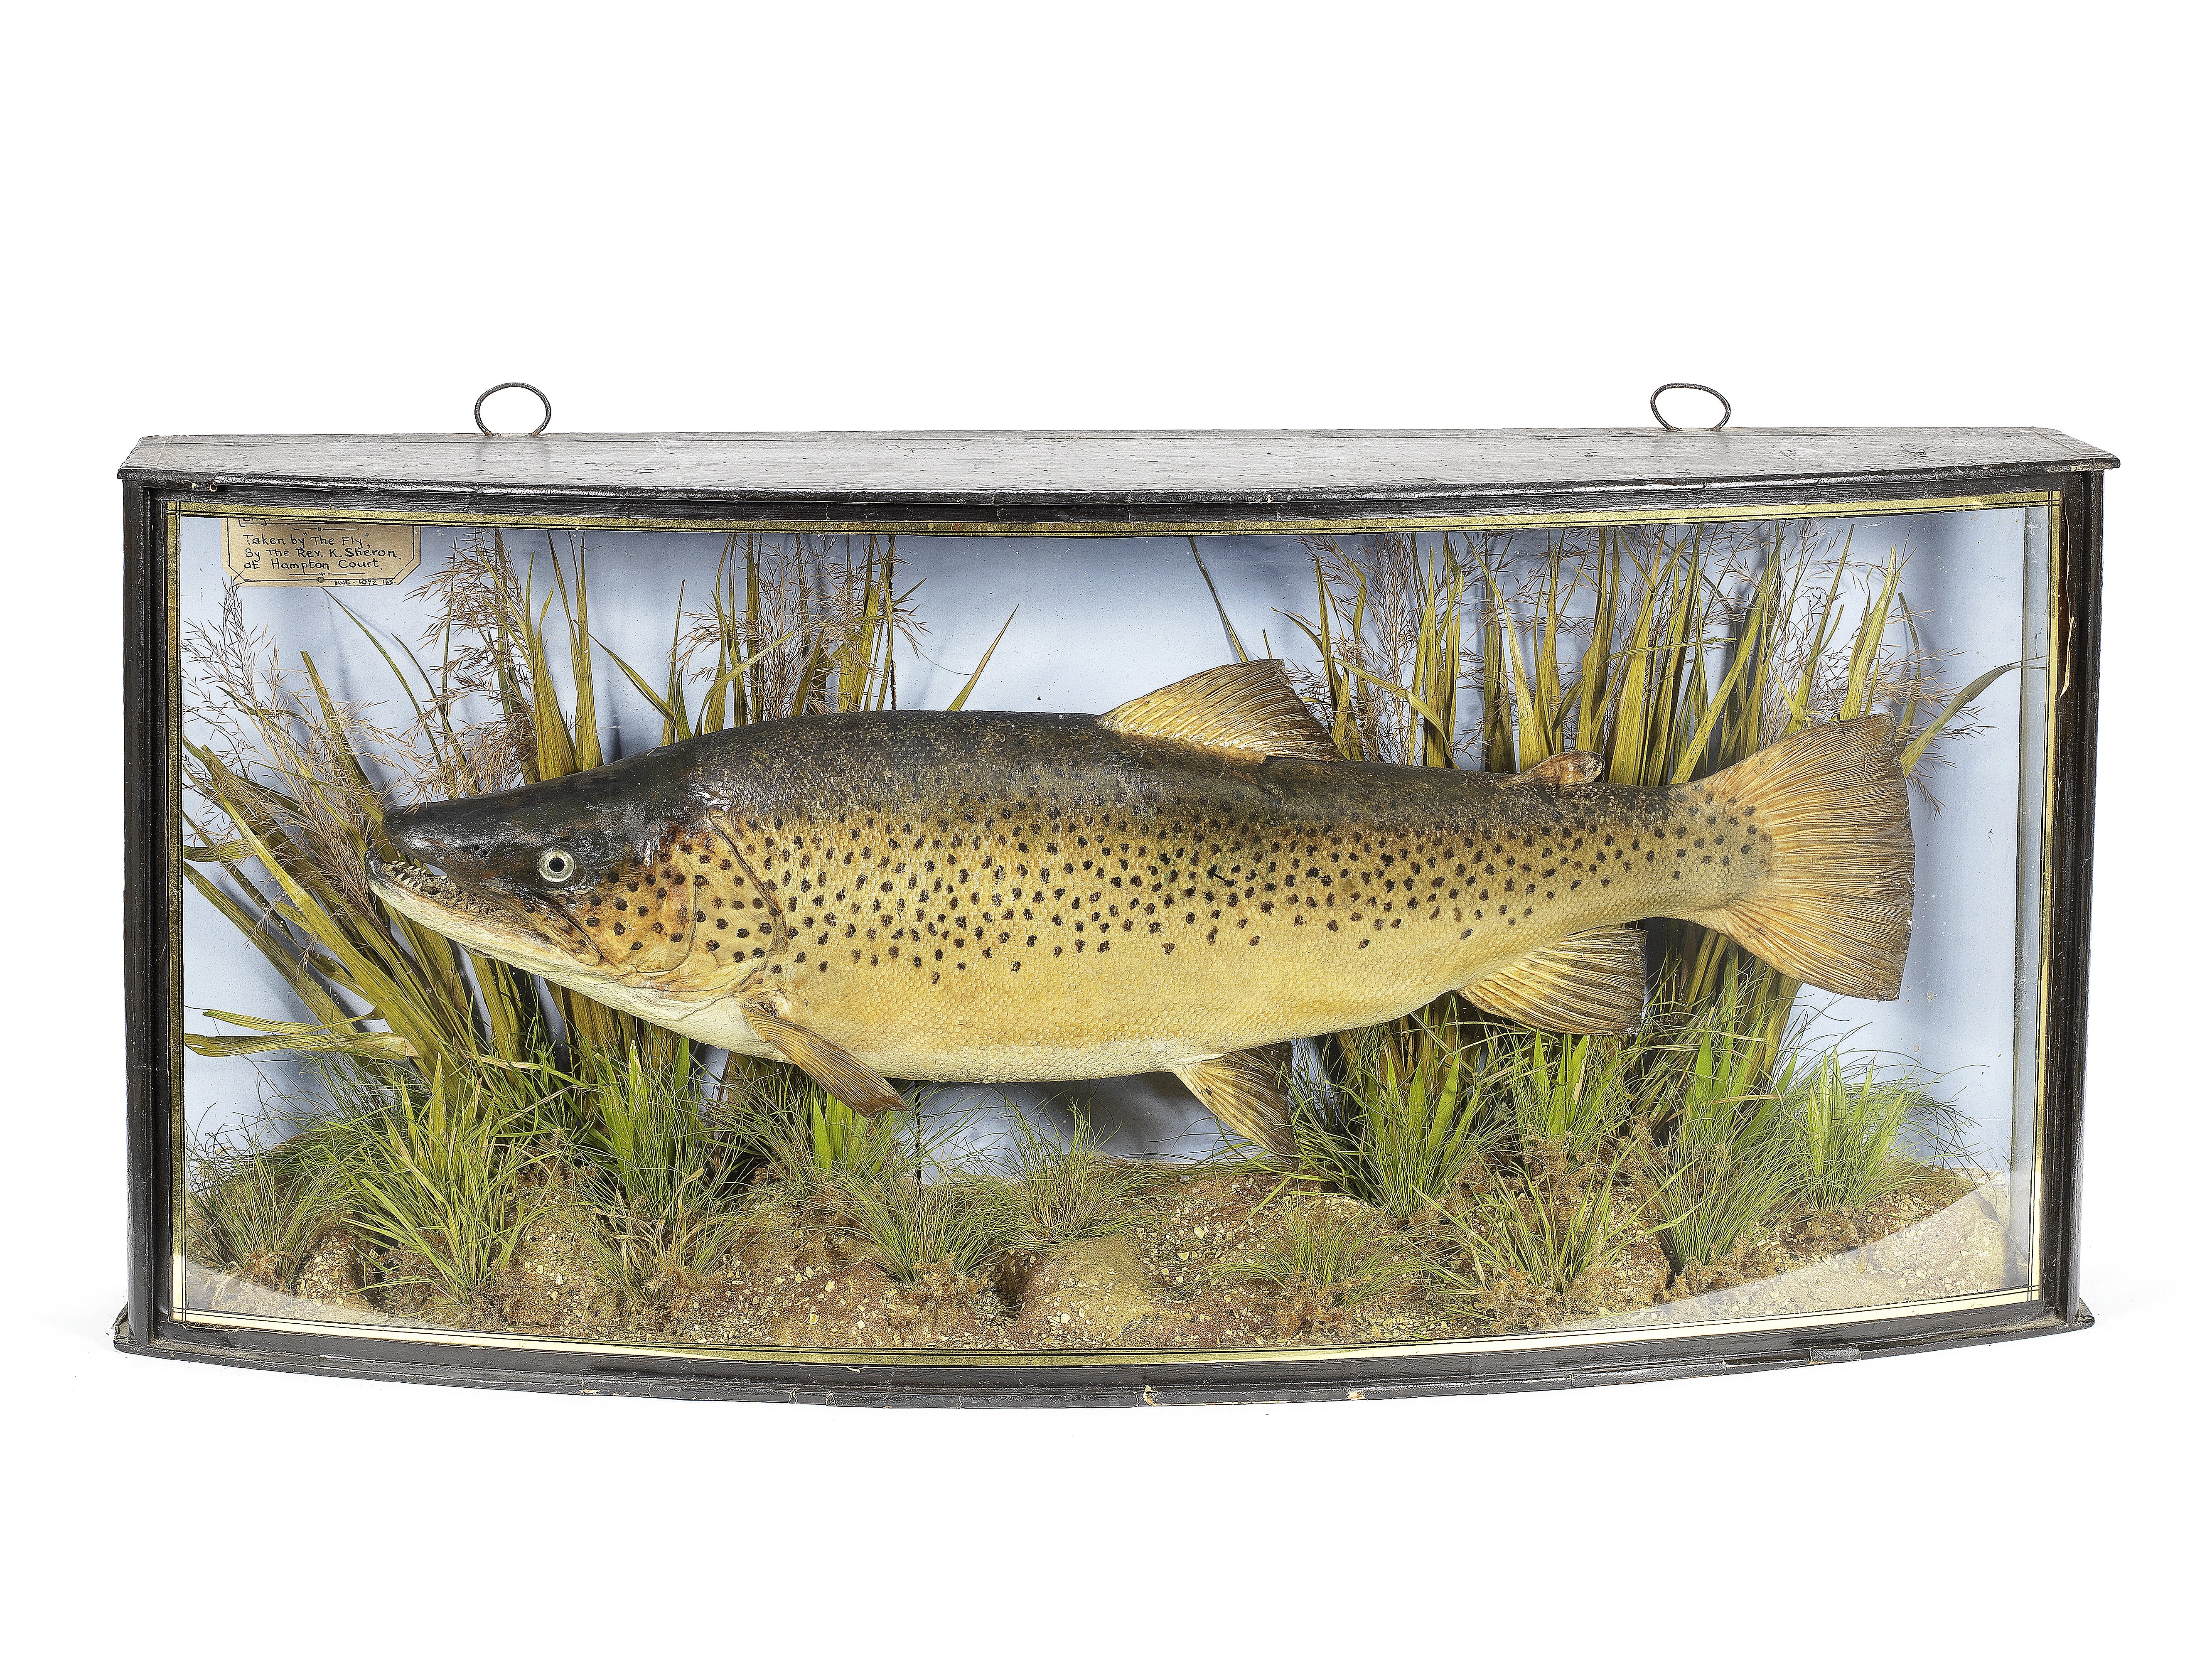 A cased '1922 English record' Thames trout